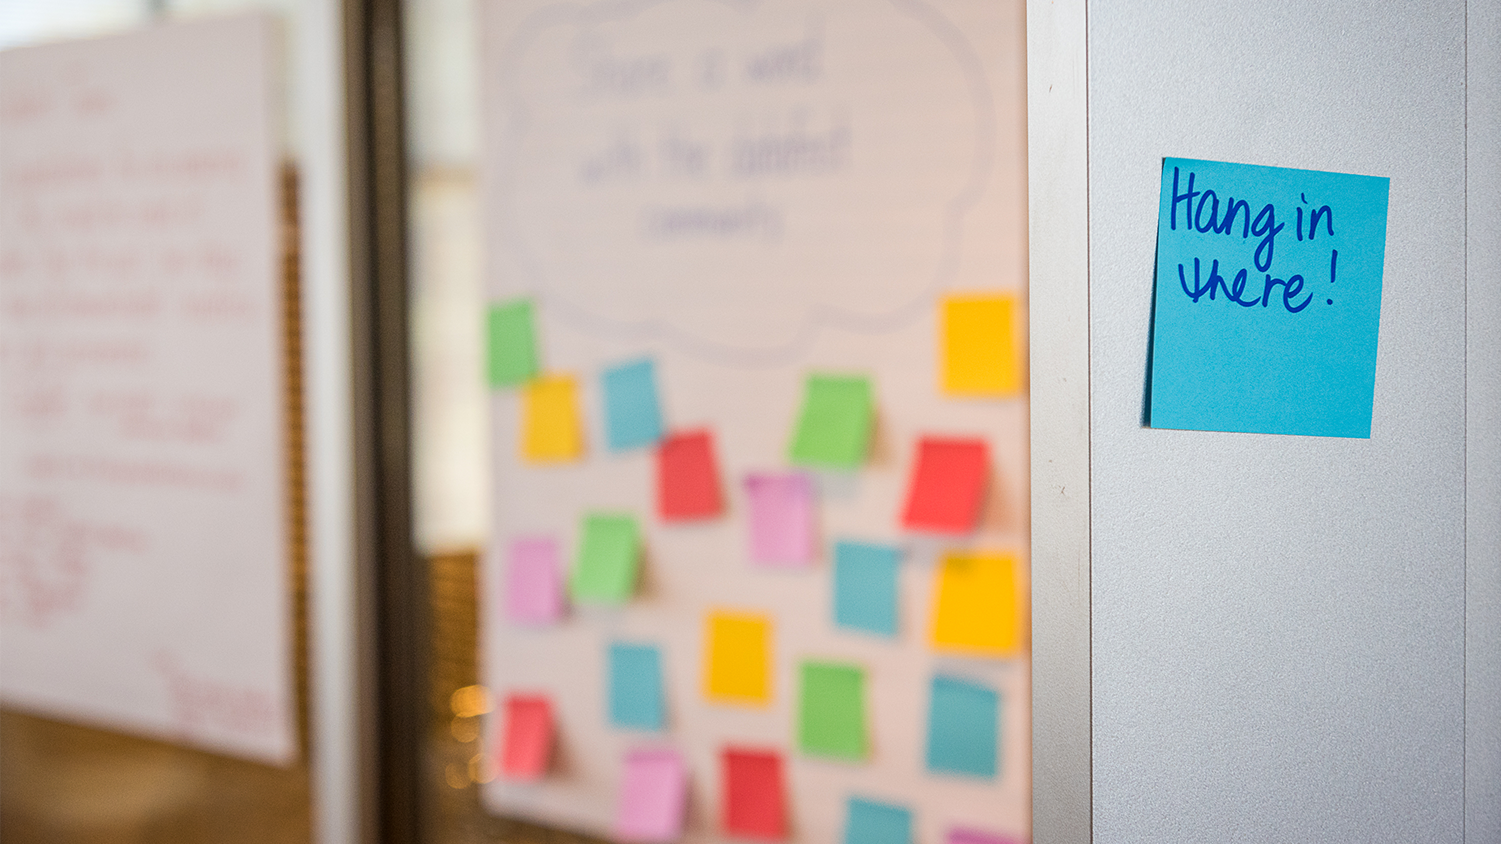 A blue sticky note with text "Hang in there" on a wall next to a posterboard with other sticky notes